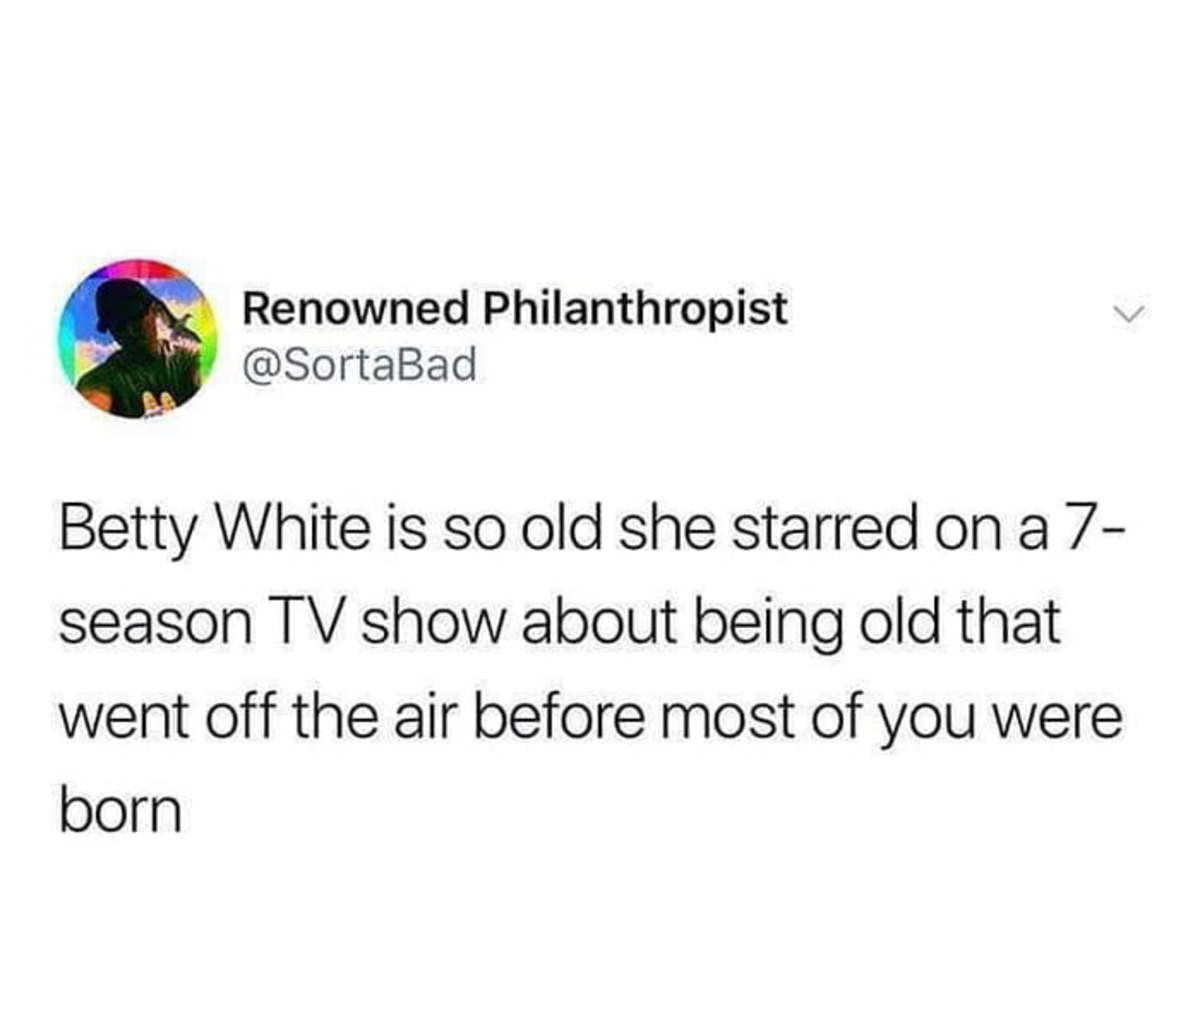 point - Renowned Philanthropist Betty White is so old she starred on a 7 season Tv show about being old that went off the air before most of you were born